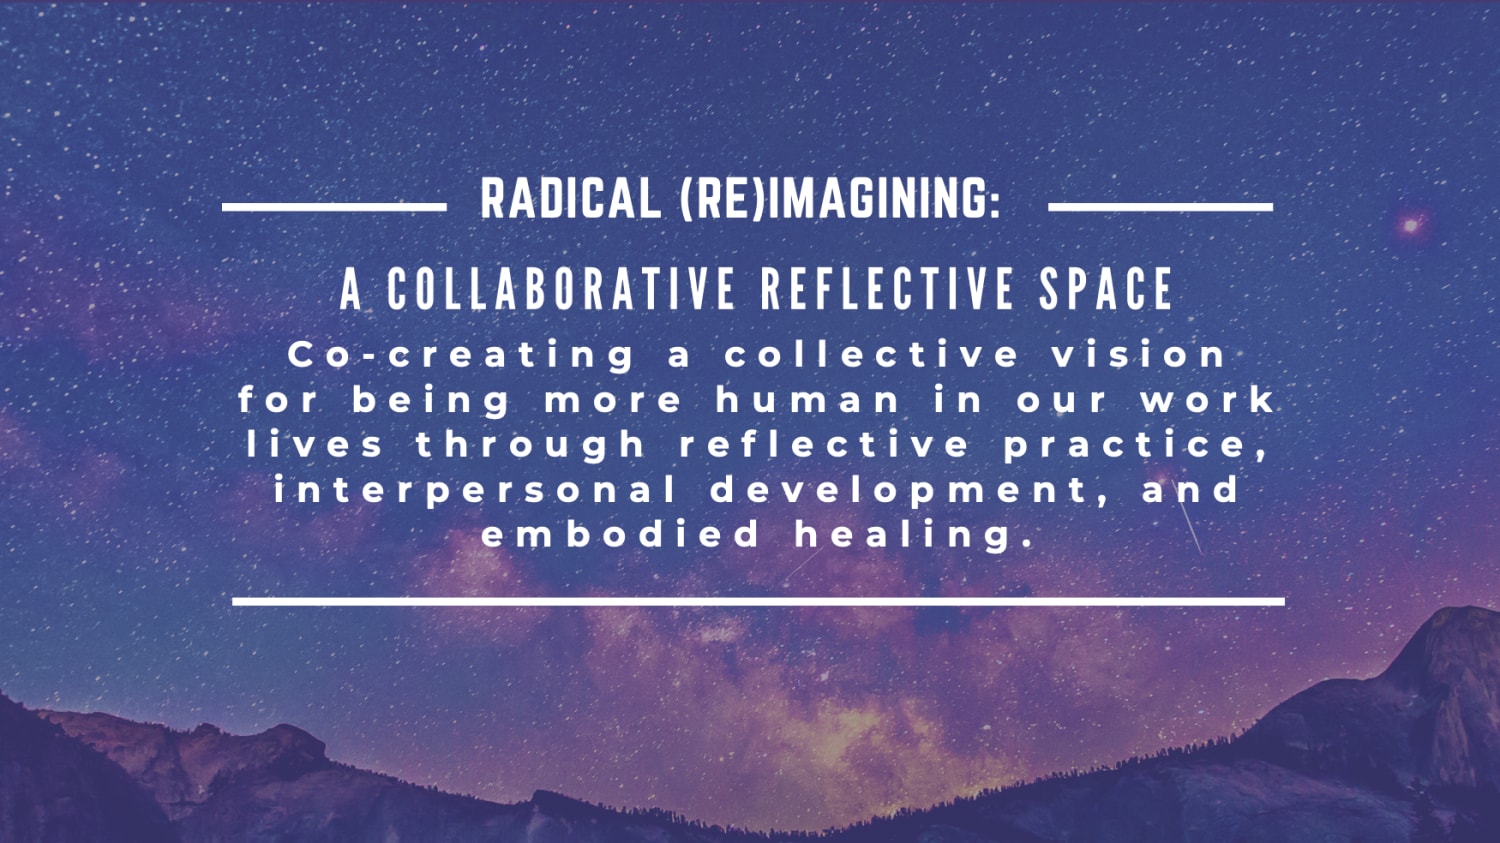 Radical re-imaging: a collaborative reflective space cocreating a collective vision for being more human in our work lives through reflective practice, interpersonal development, and embodied healing. 